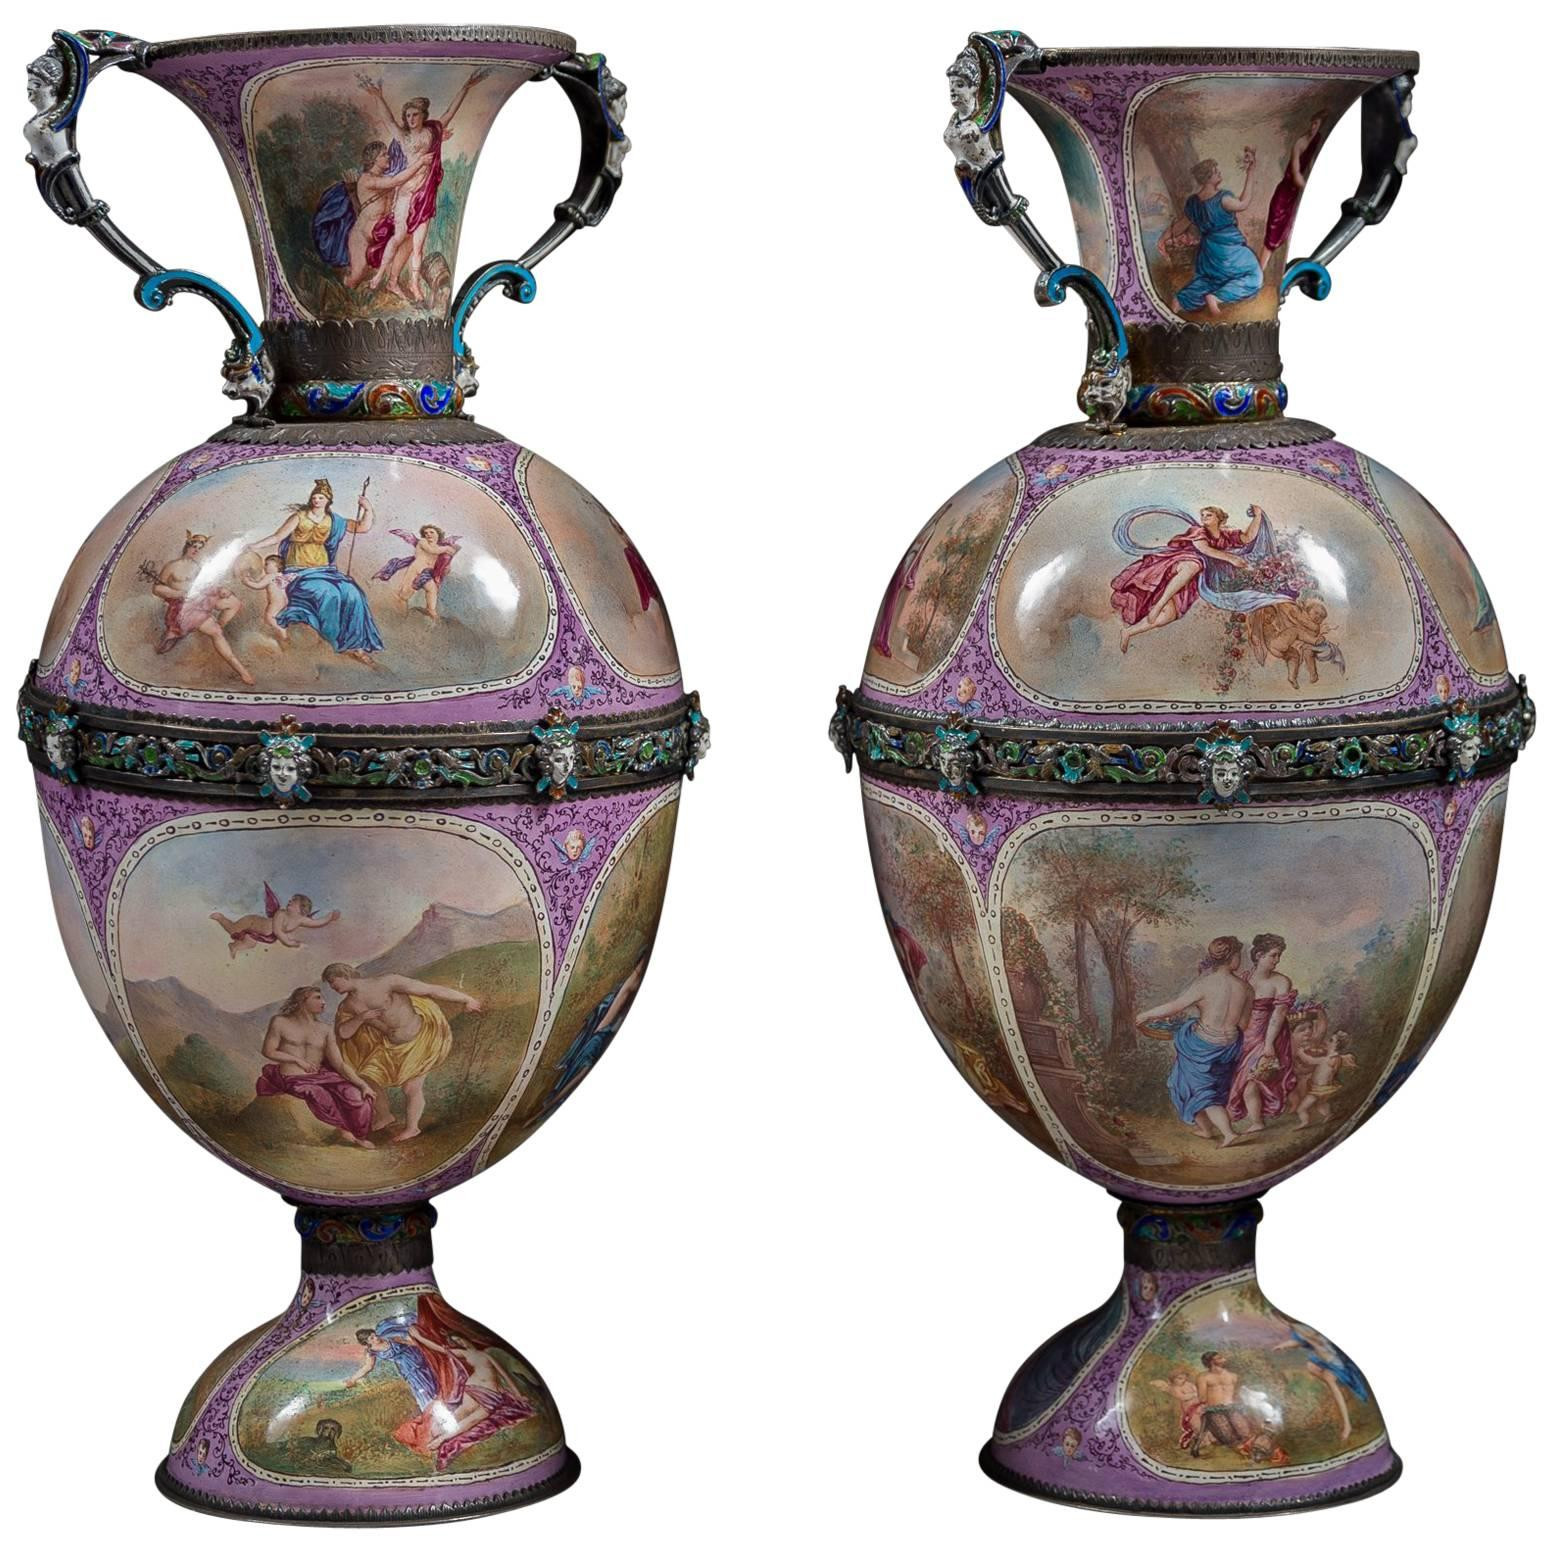 12 Perfect Antique Silver Vases for Sale 2024 free download antique silver vases for sale of pair of austrian silver and viennese enamel vases by hermann bohm with pair of austrian silver and viennese enamel vases by hermann bohm for sale at 1stdibs